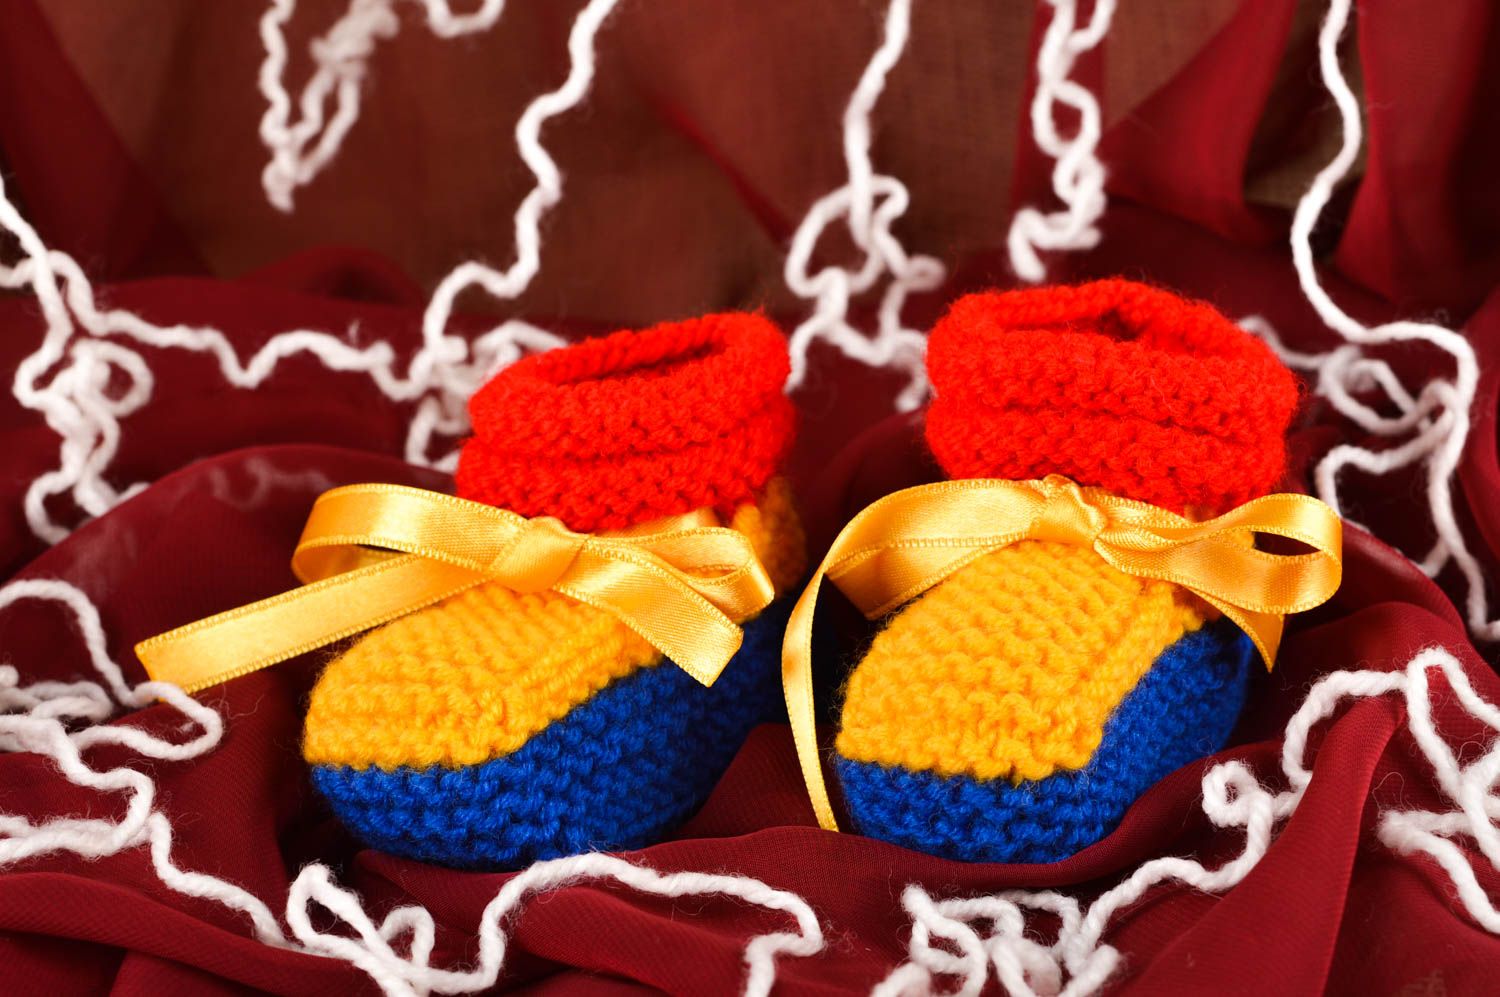 Handmade crochet baby booties baby accessories crochet ideas gifts for kids photo 1